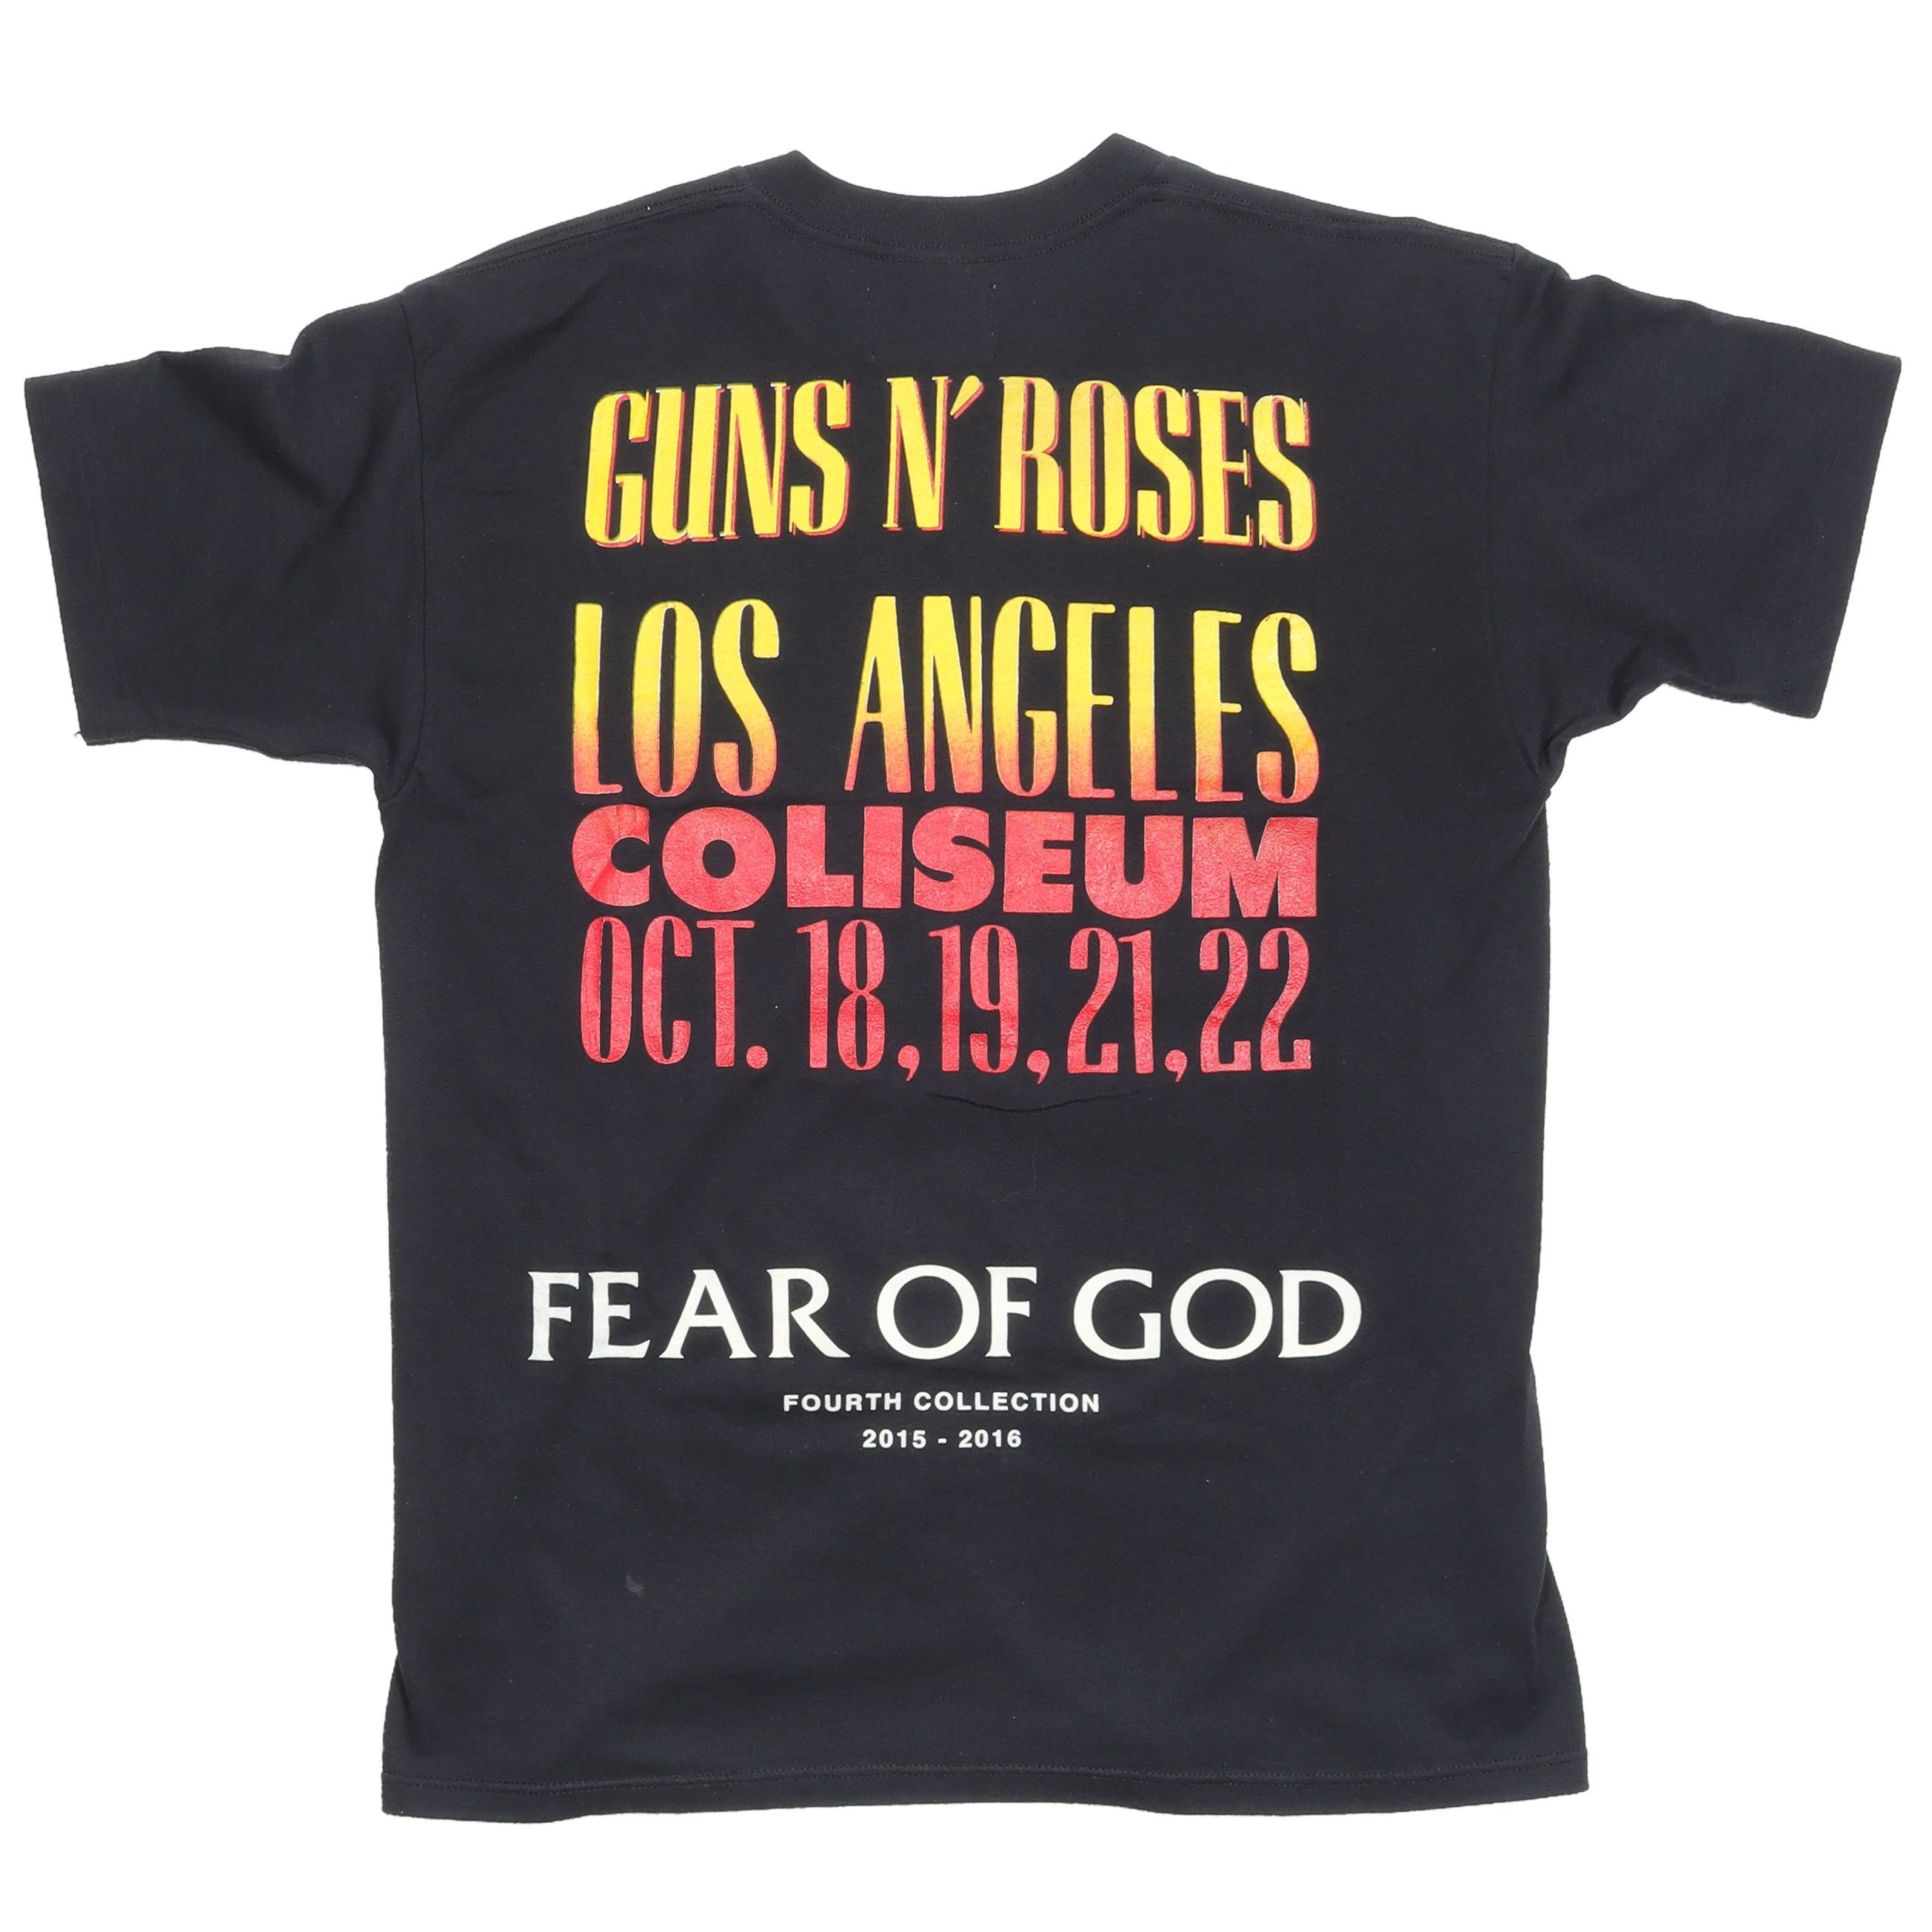 Vintage Fear of God 4th Collection Guns N' Roses T-Shirt - 2